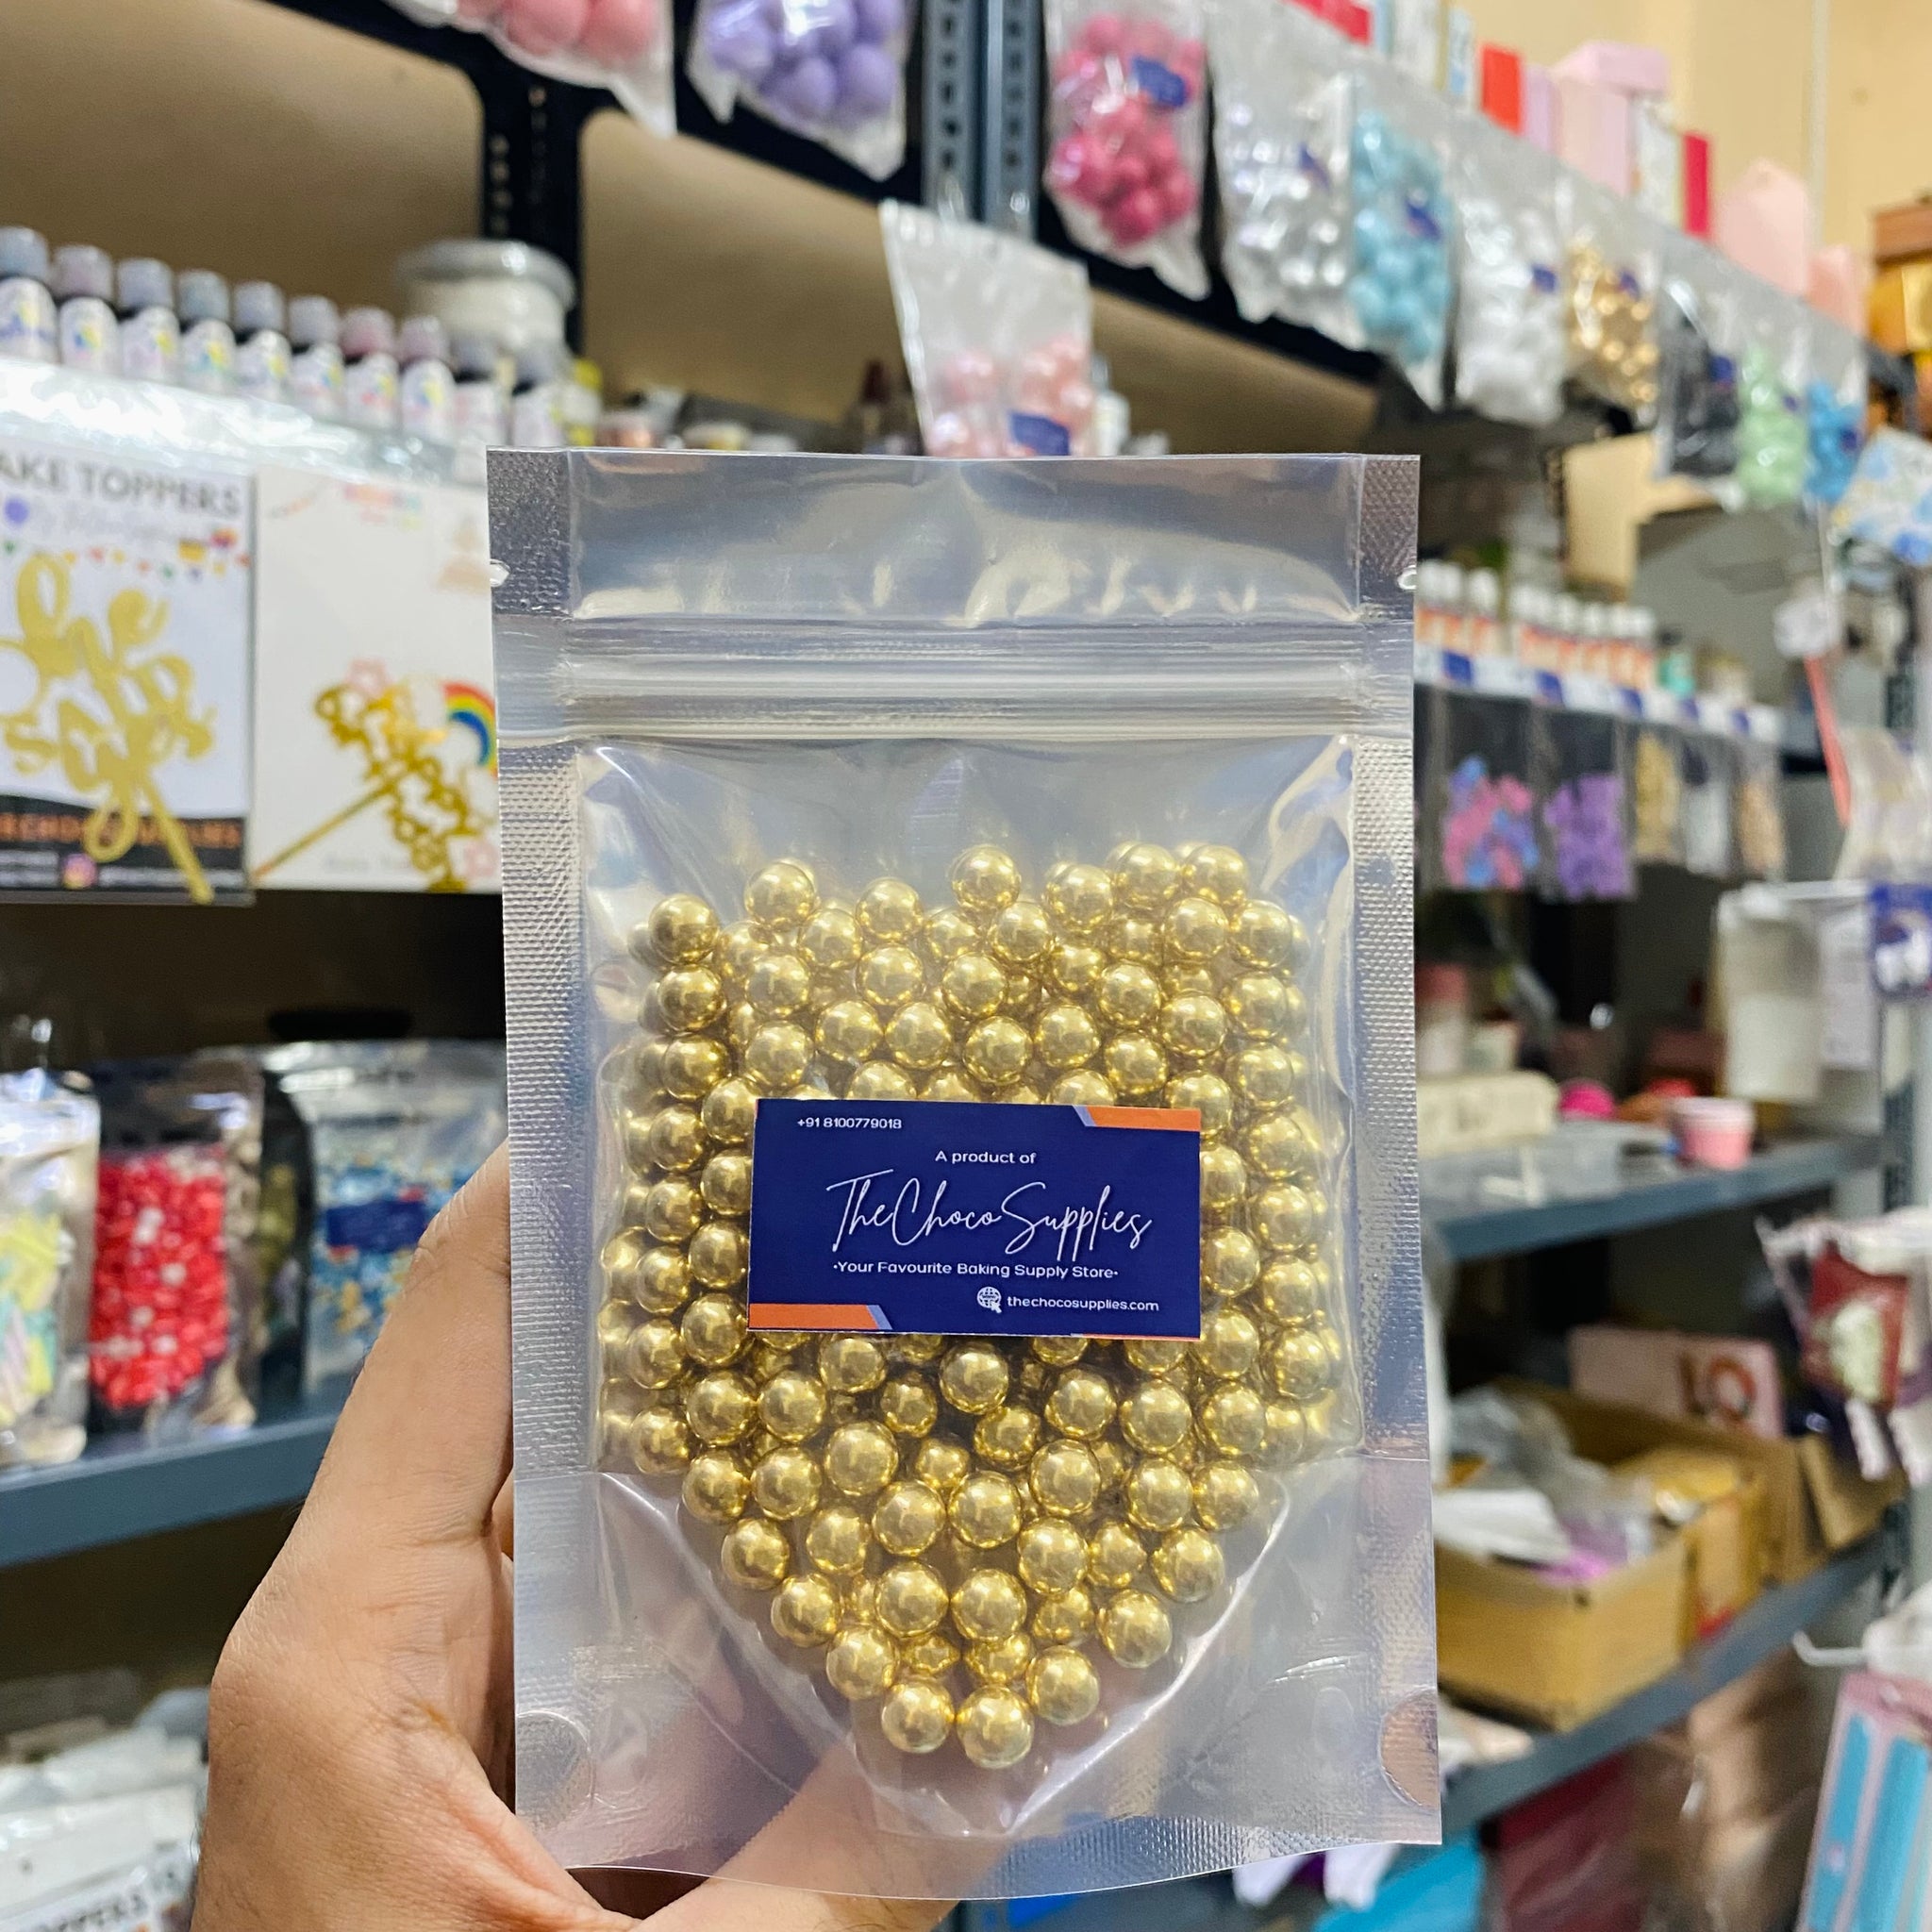 Imported Quality Gold Pearls, 7mm